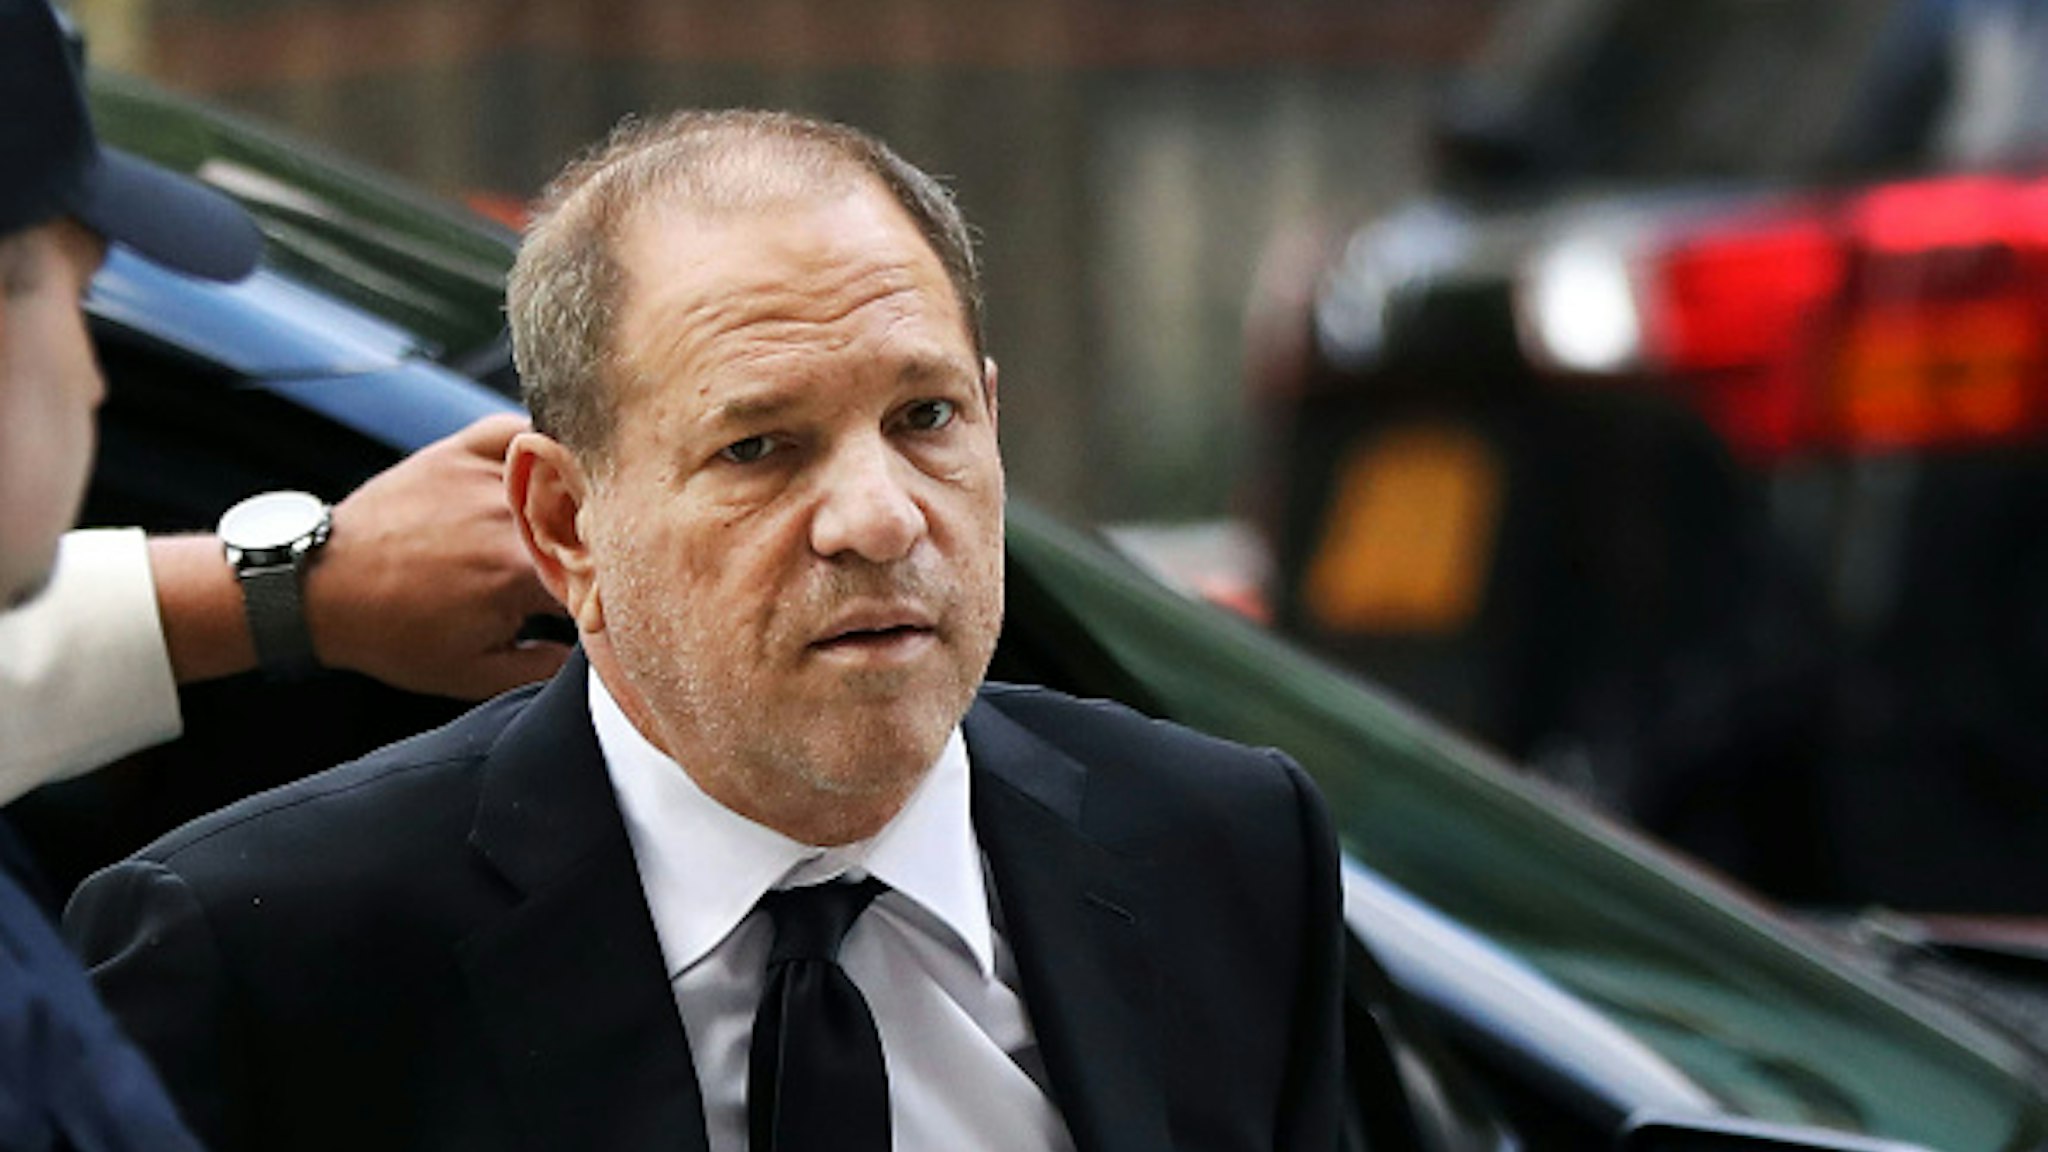 NEW YORK, NEW YORK - AUGUST 26: Harvey Weinstein arrives to court for arraignment over a new indictment for sexual assault on August 26, 2019 in New York City. The new charges against the movie mogul are from an indictment involving the actor Annabella Sciorra. Weinstein has already been charged with a host of other sexual assault charges and with the trial due to start in three weeks prosecutors are likely to request to add Sciorra’s testimony to be included rather than add an additional charge.